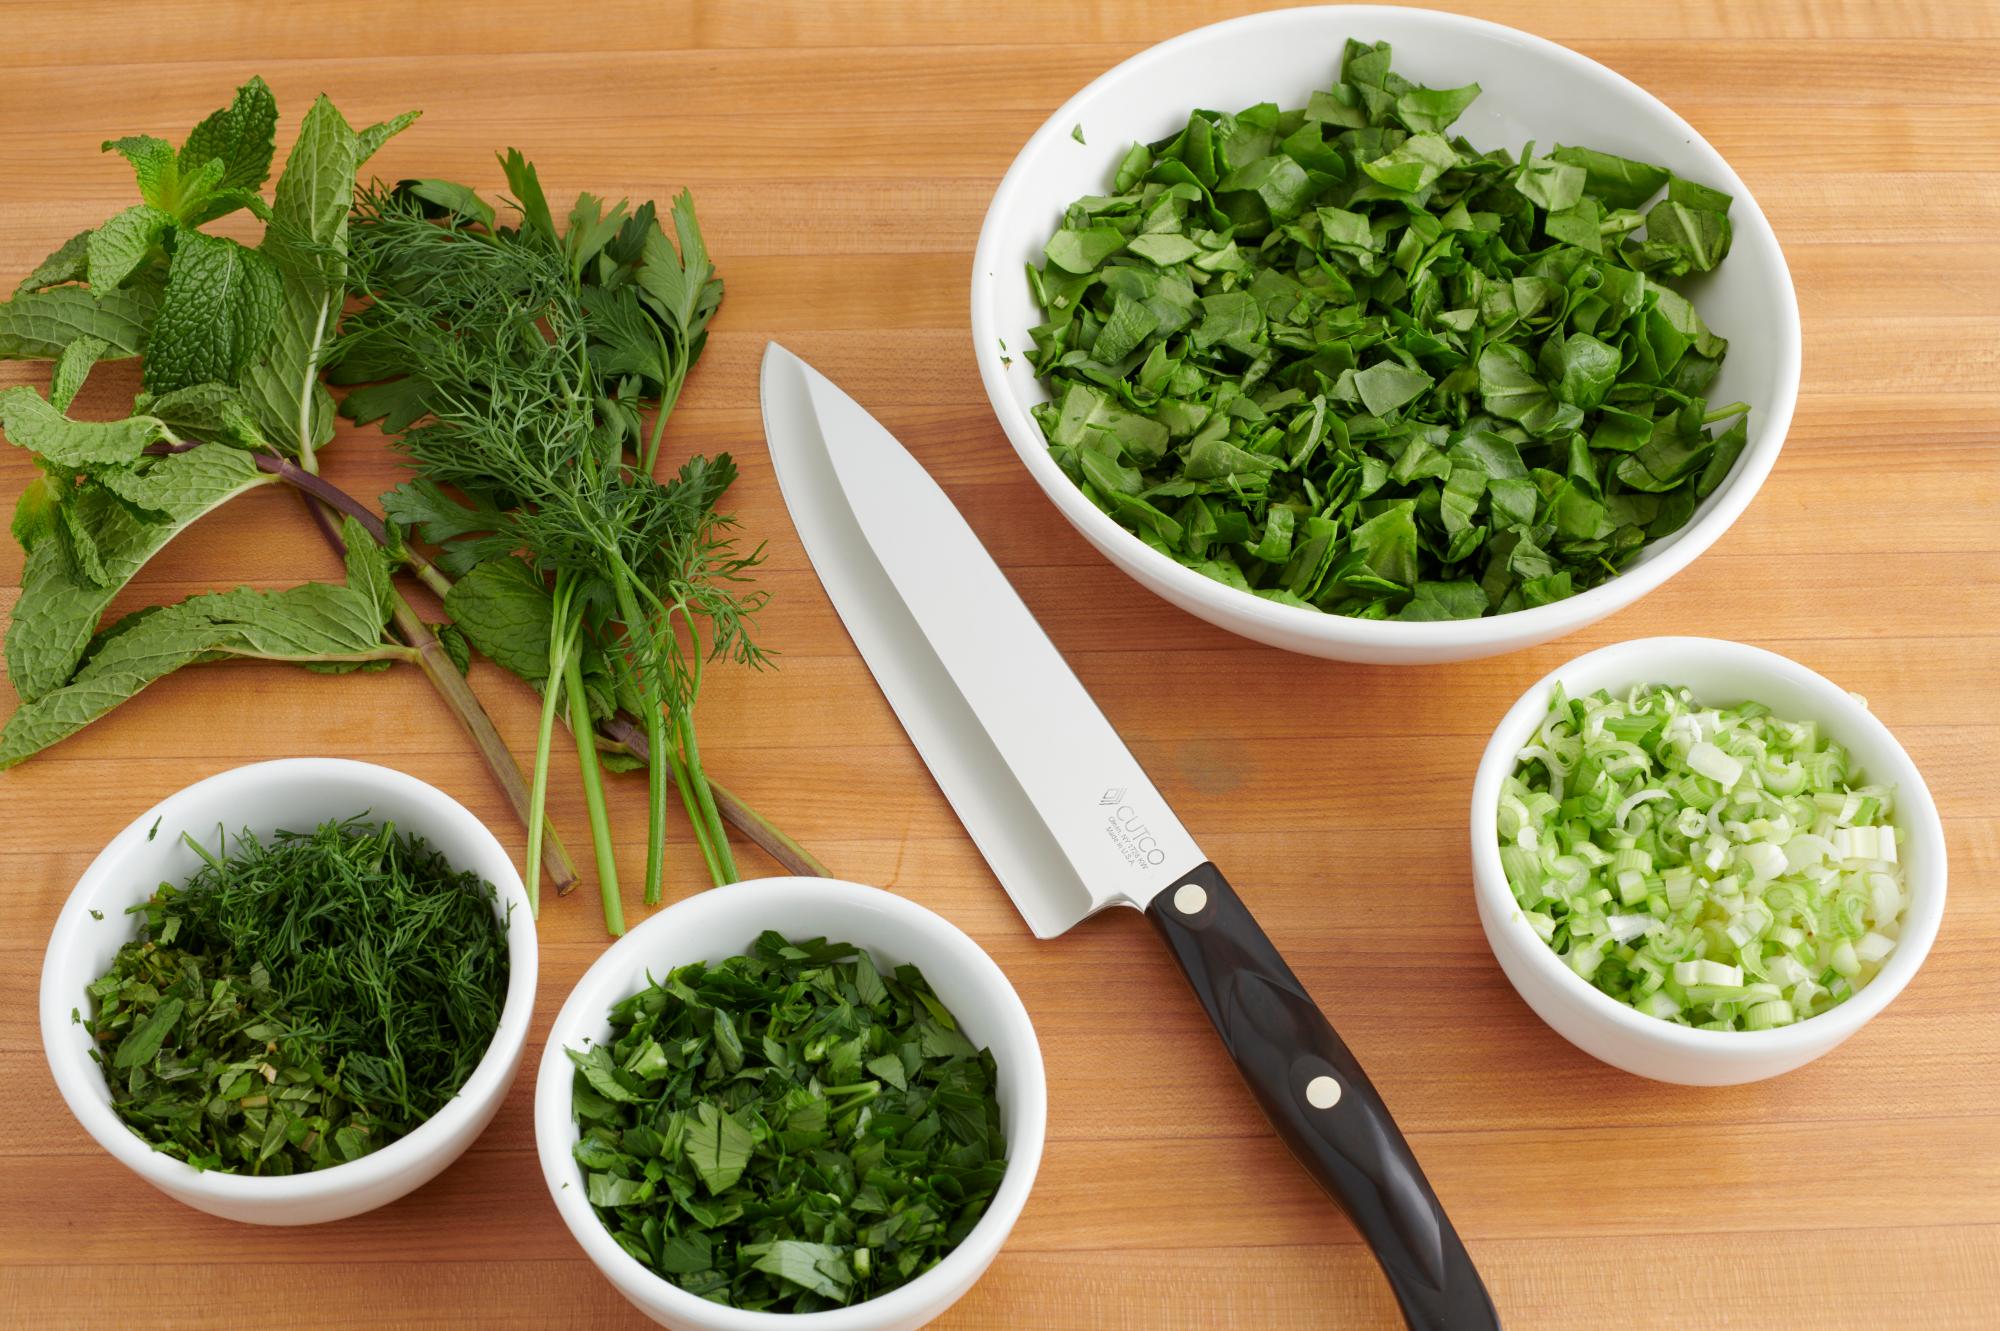 Chop the spinach, parsley, scallions, dill and mint with a Petite Chef.